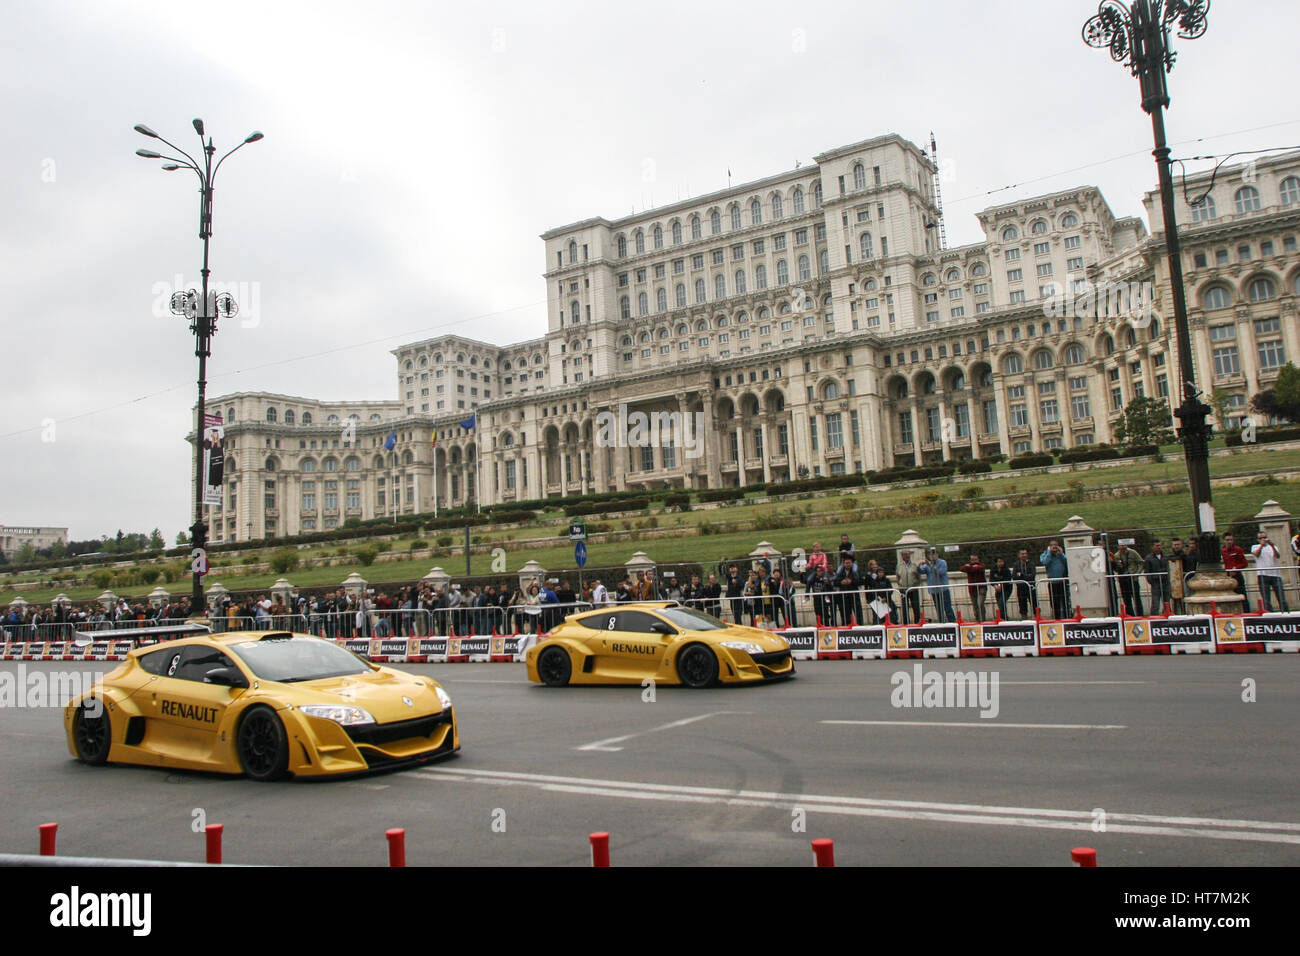 Bucharest, Romania, October 10, 2009: Renault racing cars take driving demonstrations on the occasion of Renault Road show held in Bucharest. Stock Photo